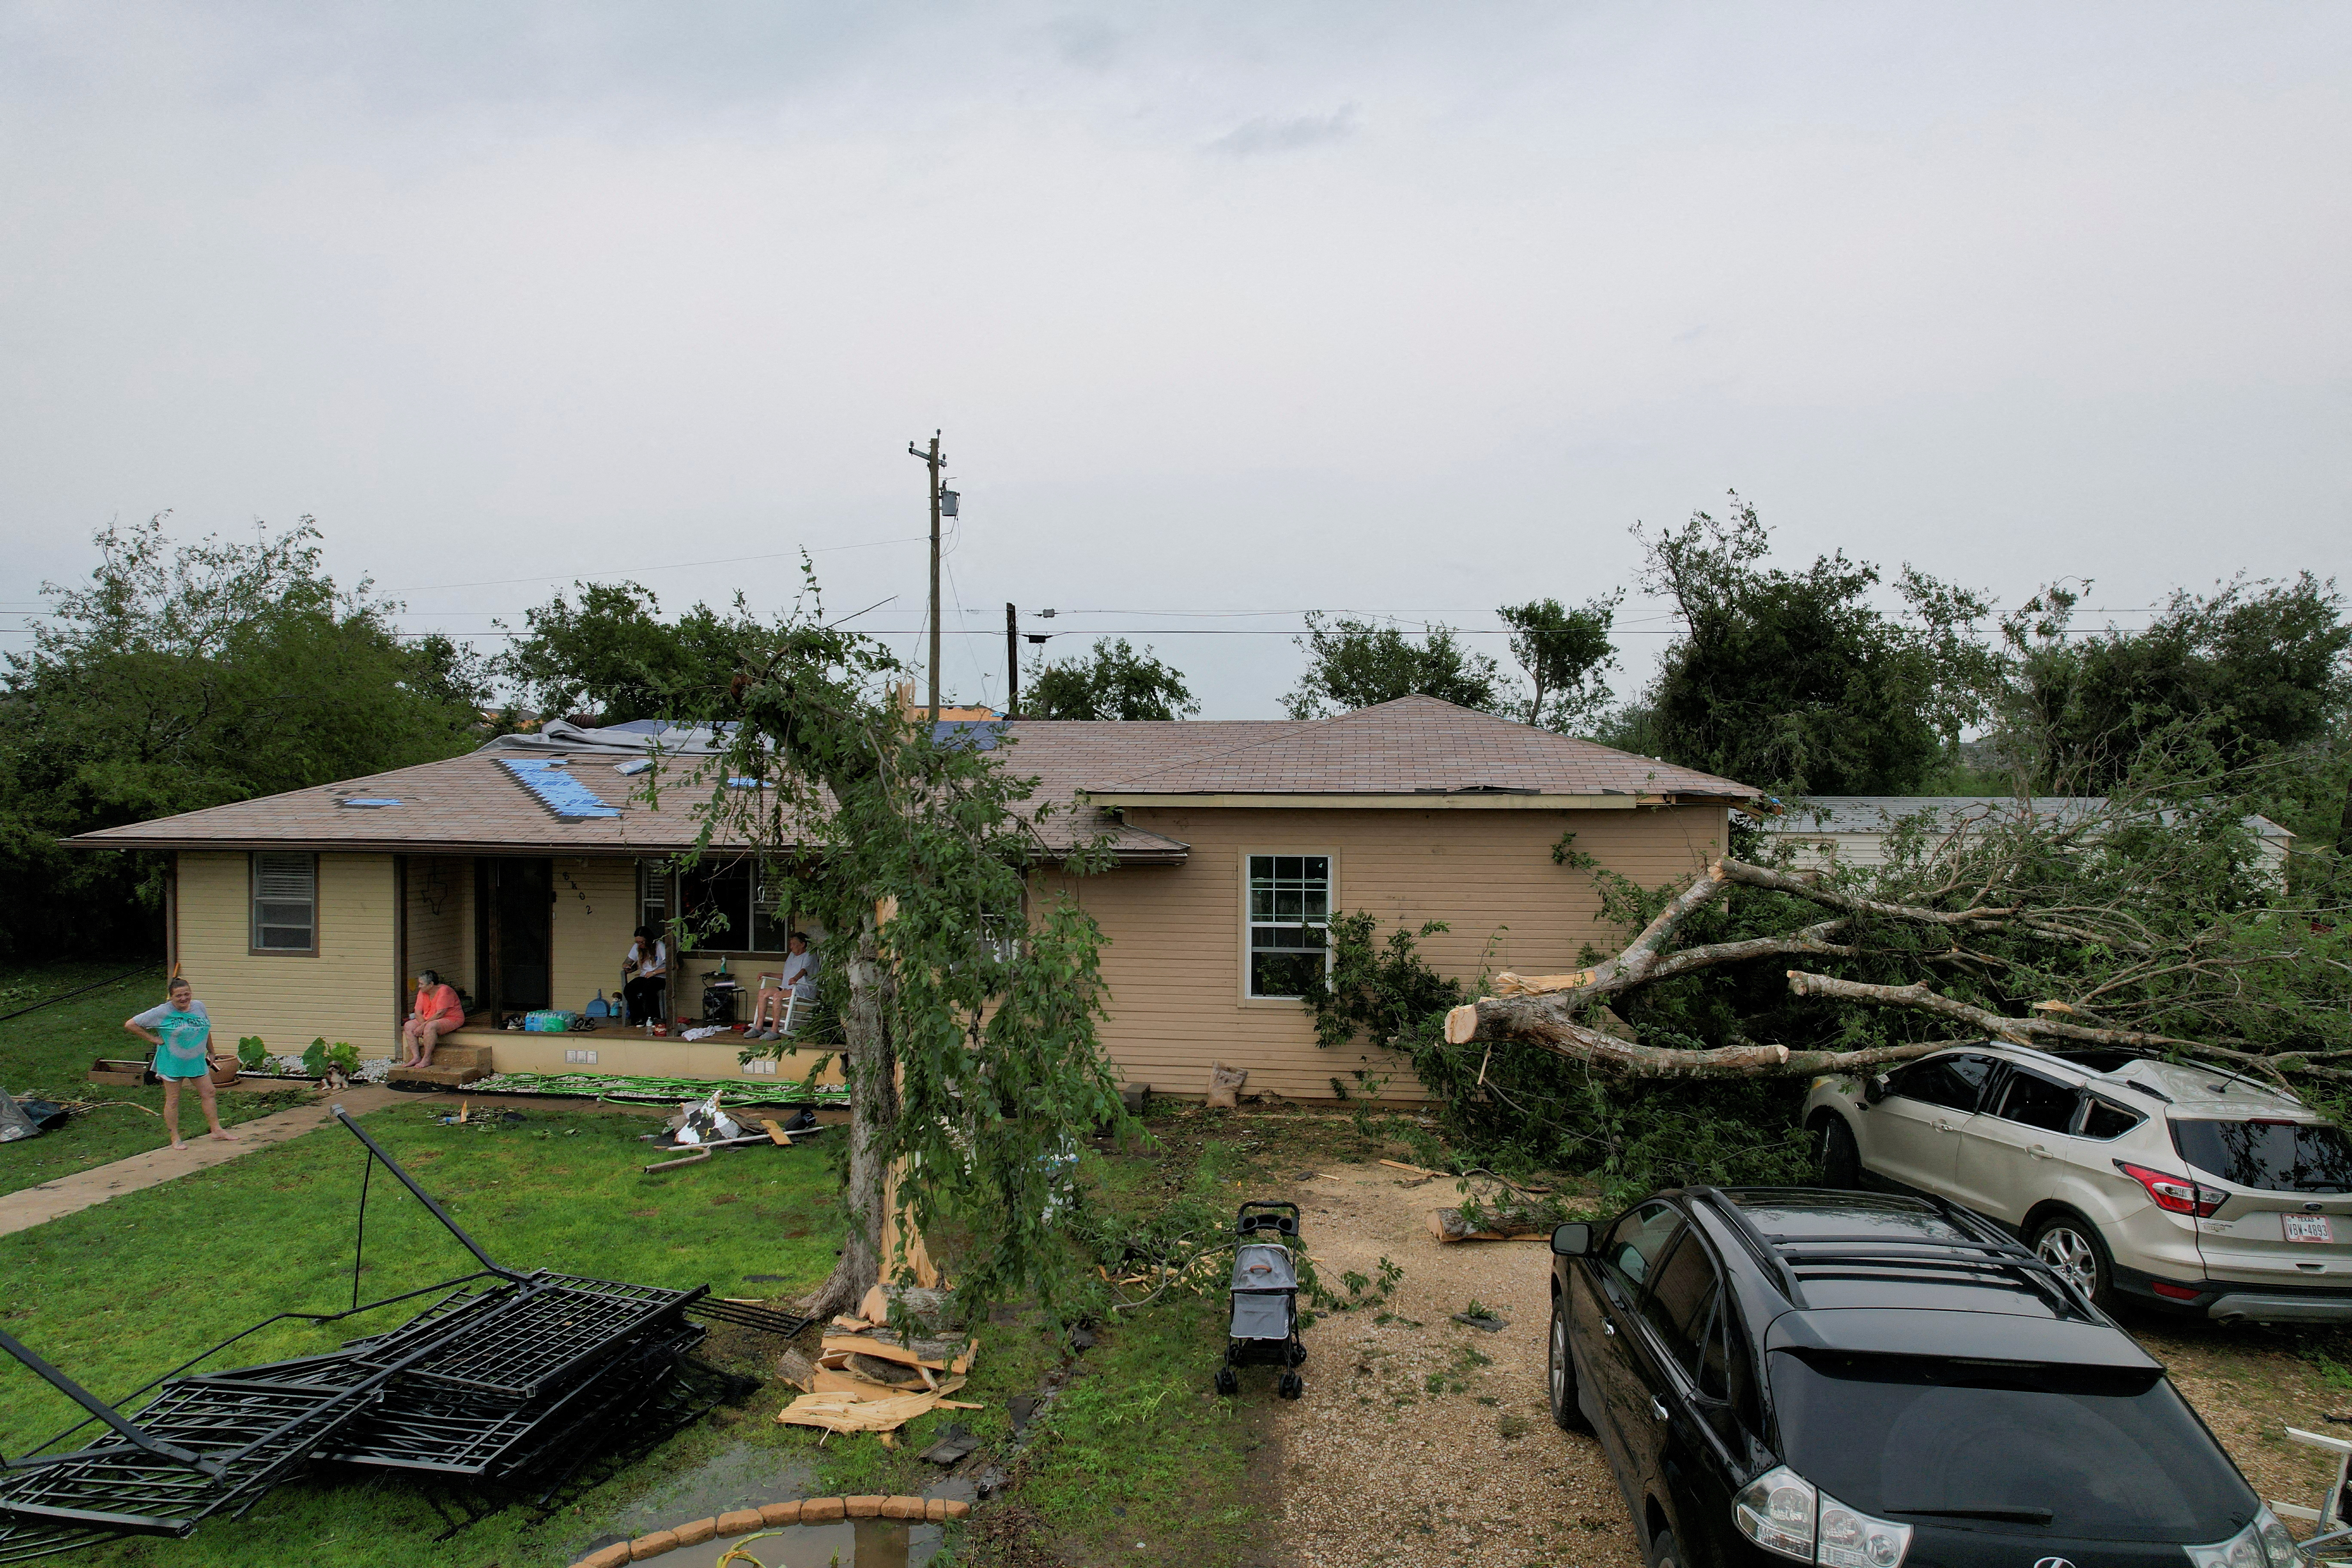 A view of the damage sustained by 55-year-old Cindi Watts' home, after a tornado ripped through the city, in Temple